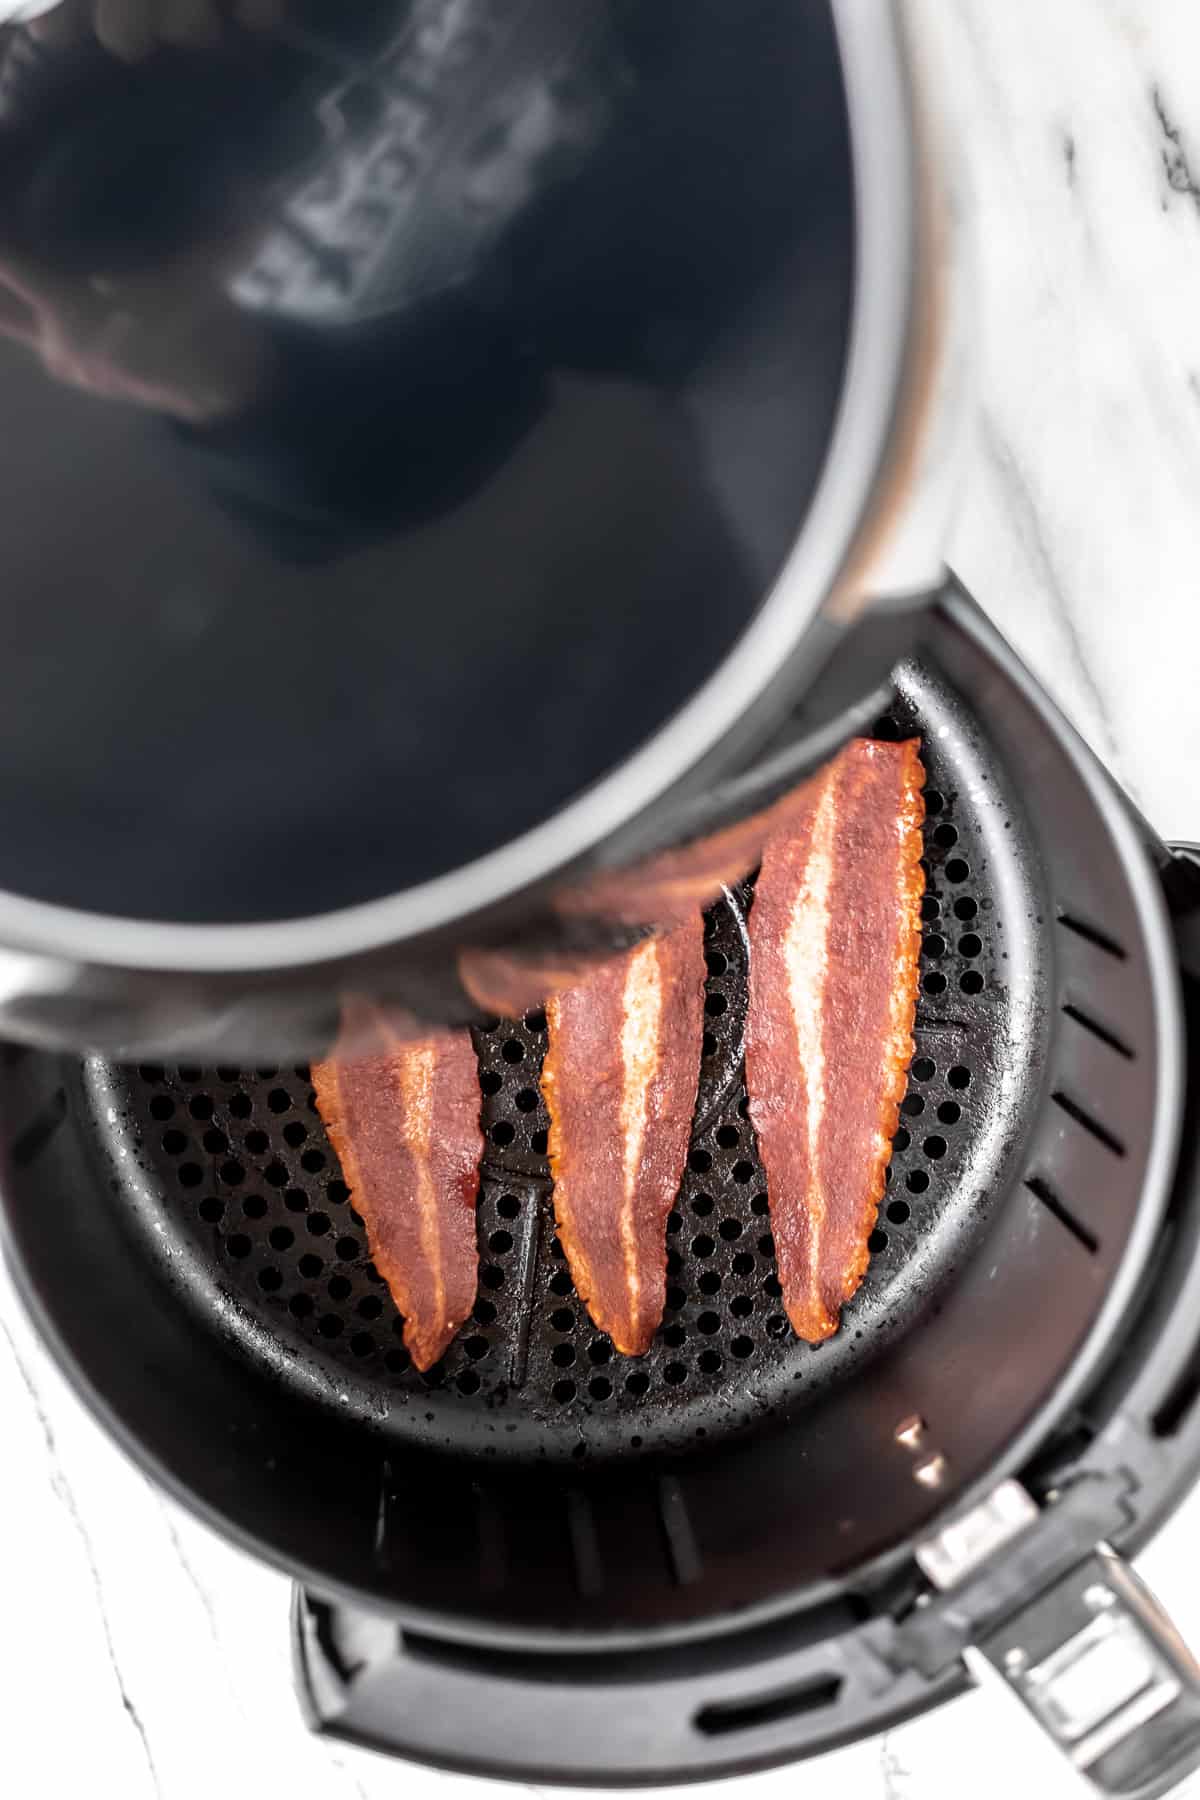 Cooked turkey bacon shown in a partially opened air fry basket.